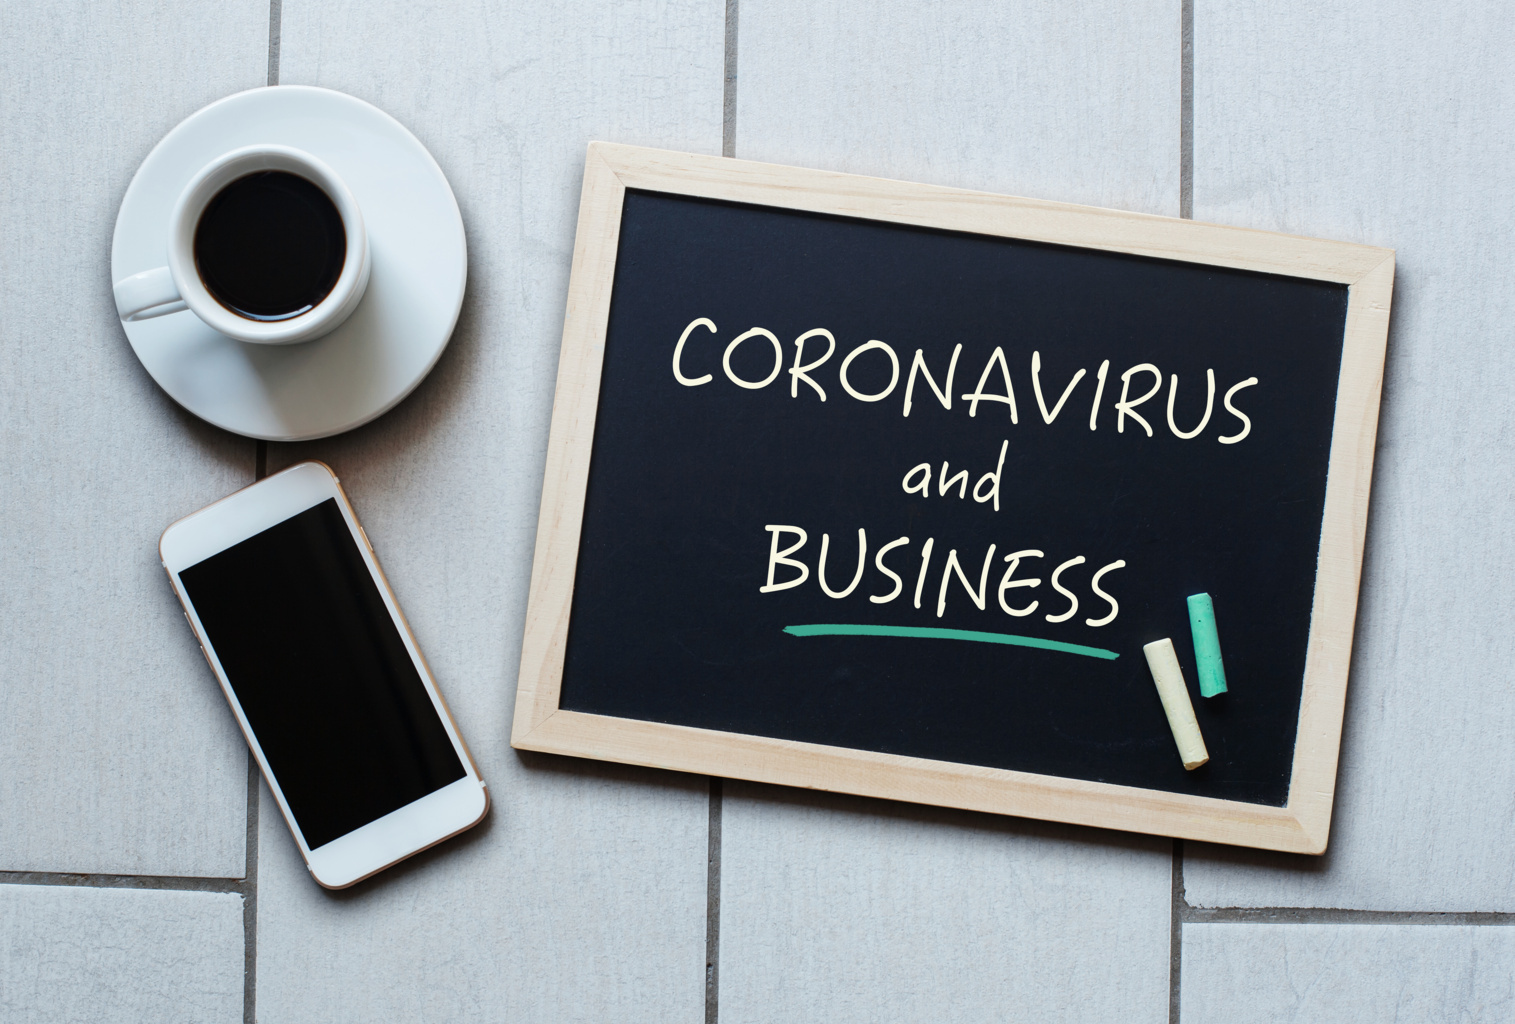 Agency supports to help Irish businesses through the COVID-19 pandemic